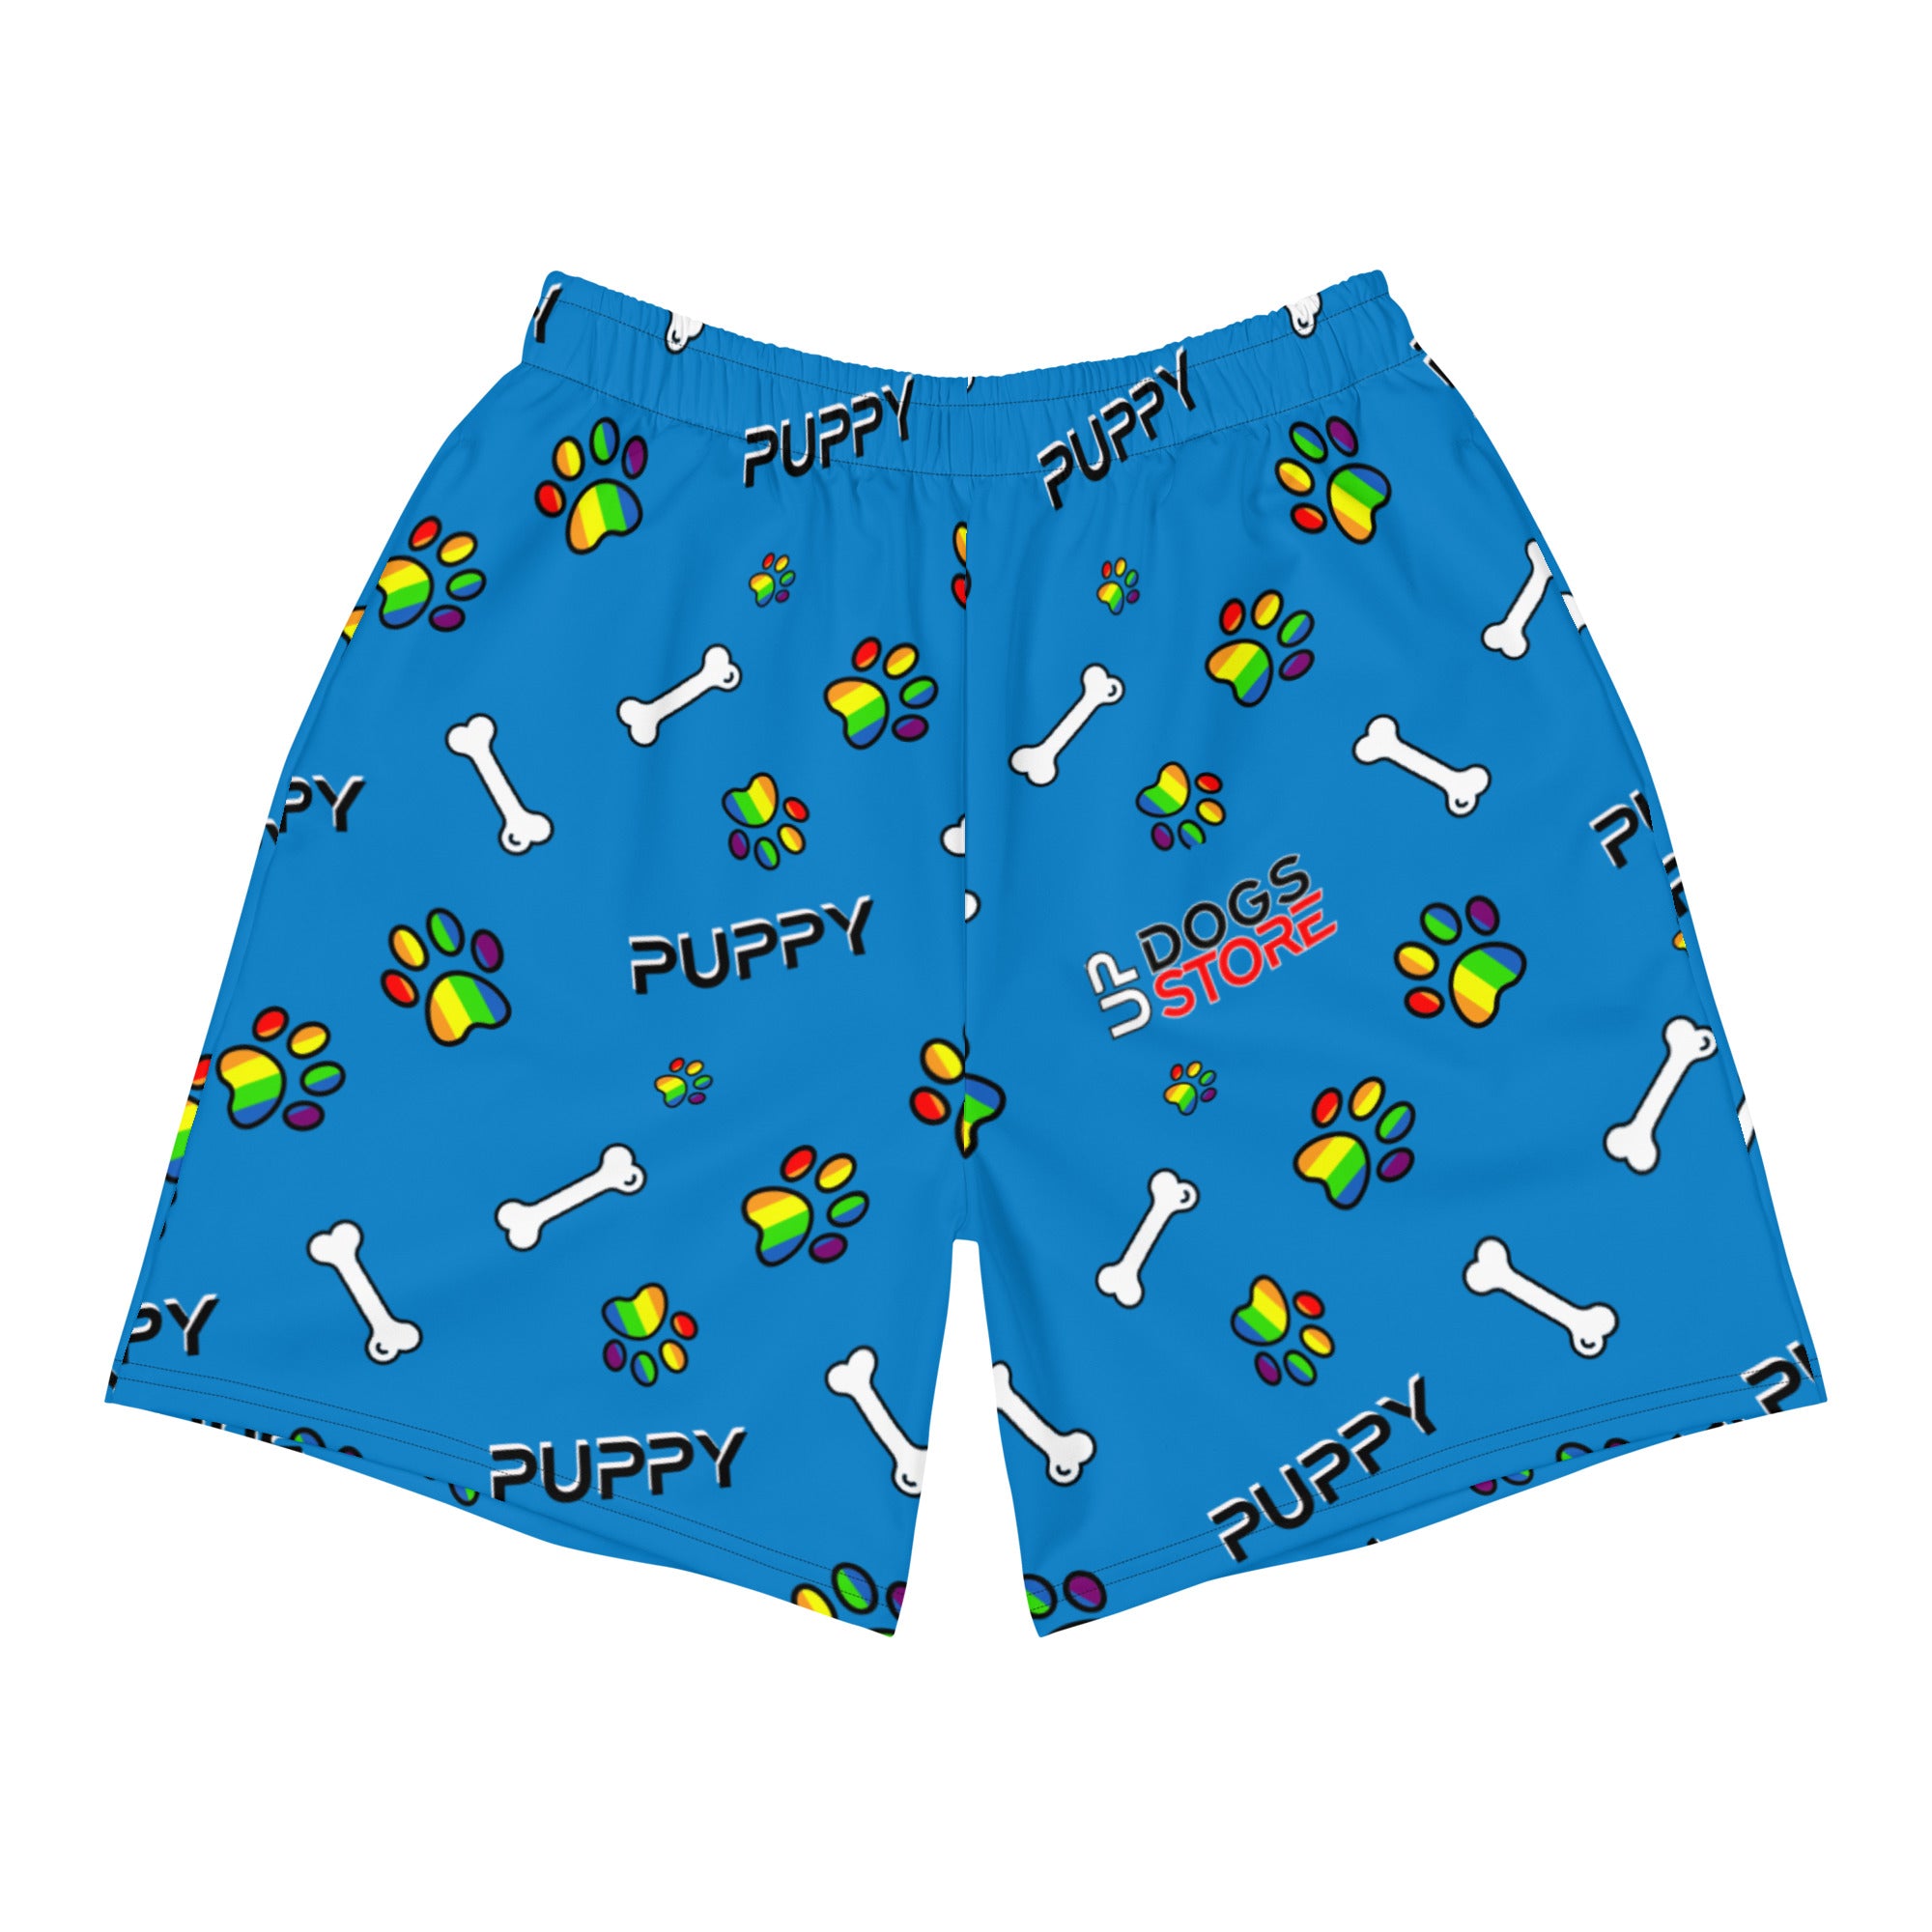 Puppy Play / Sports Pants